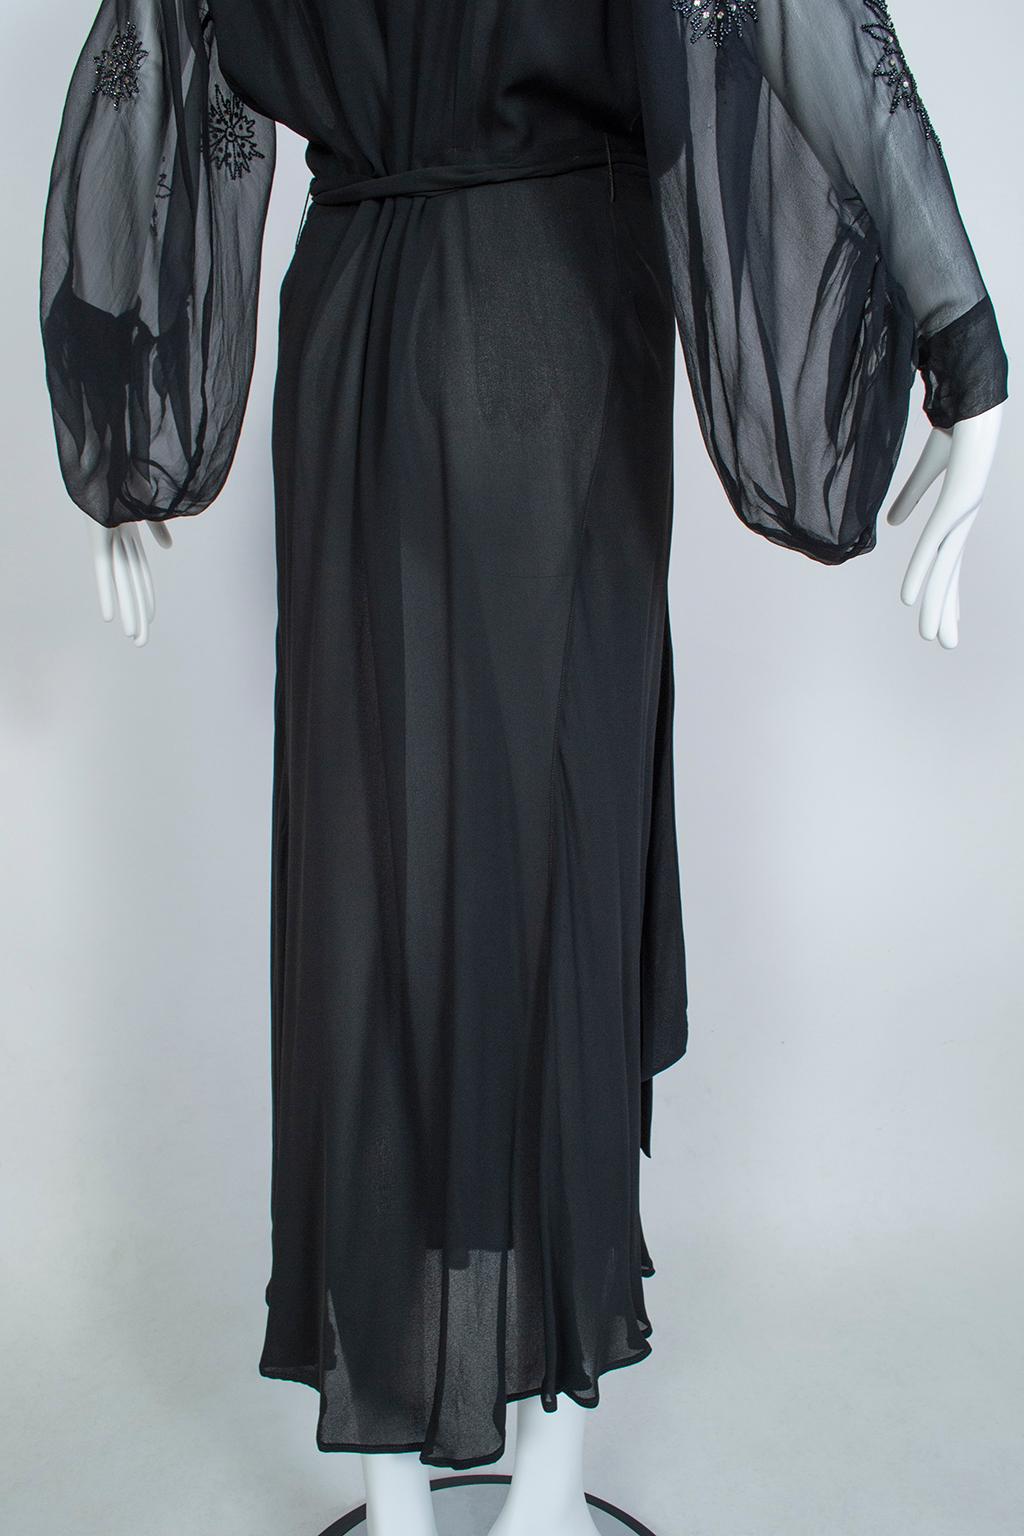 Sheer Black Crystal Bead and Crêpe Illusion Gown with Bellows Sleeves - M, 1930s 10